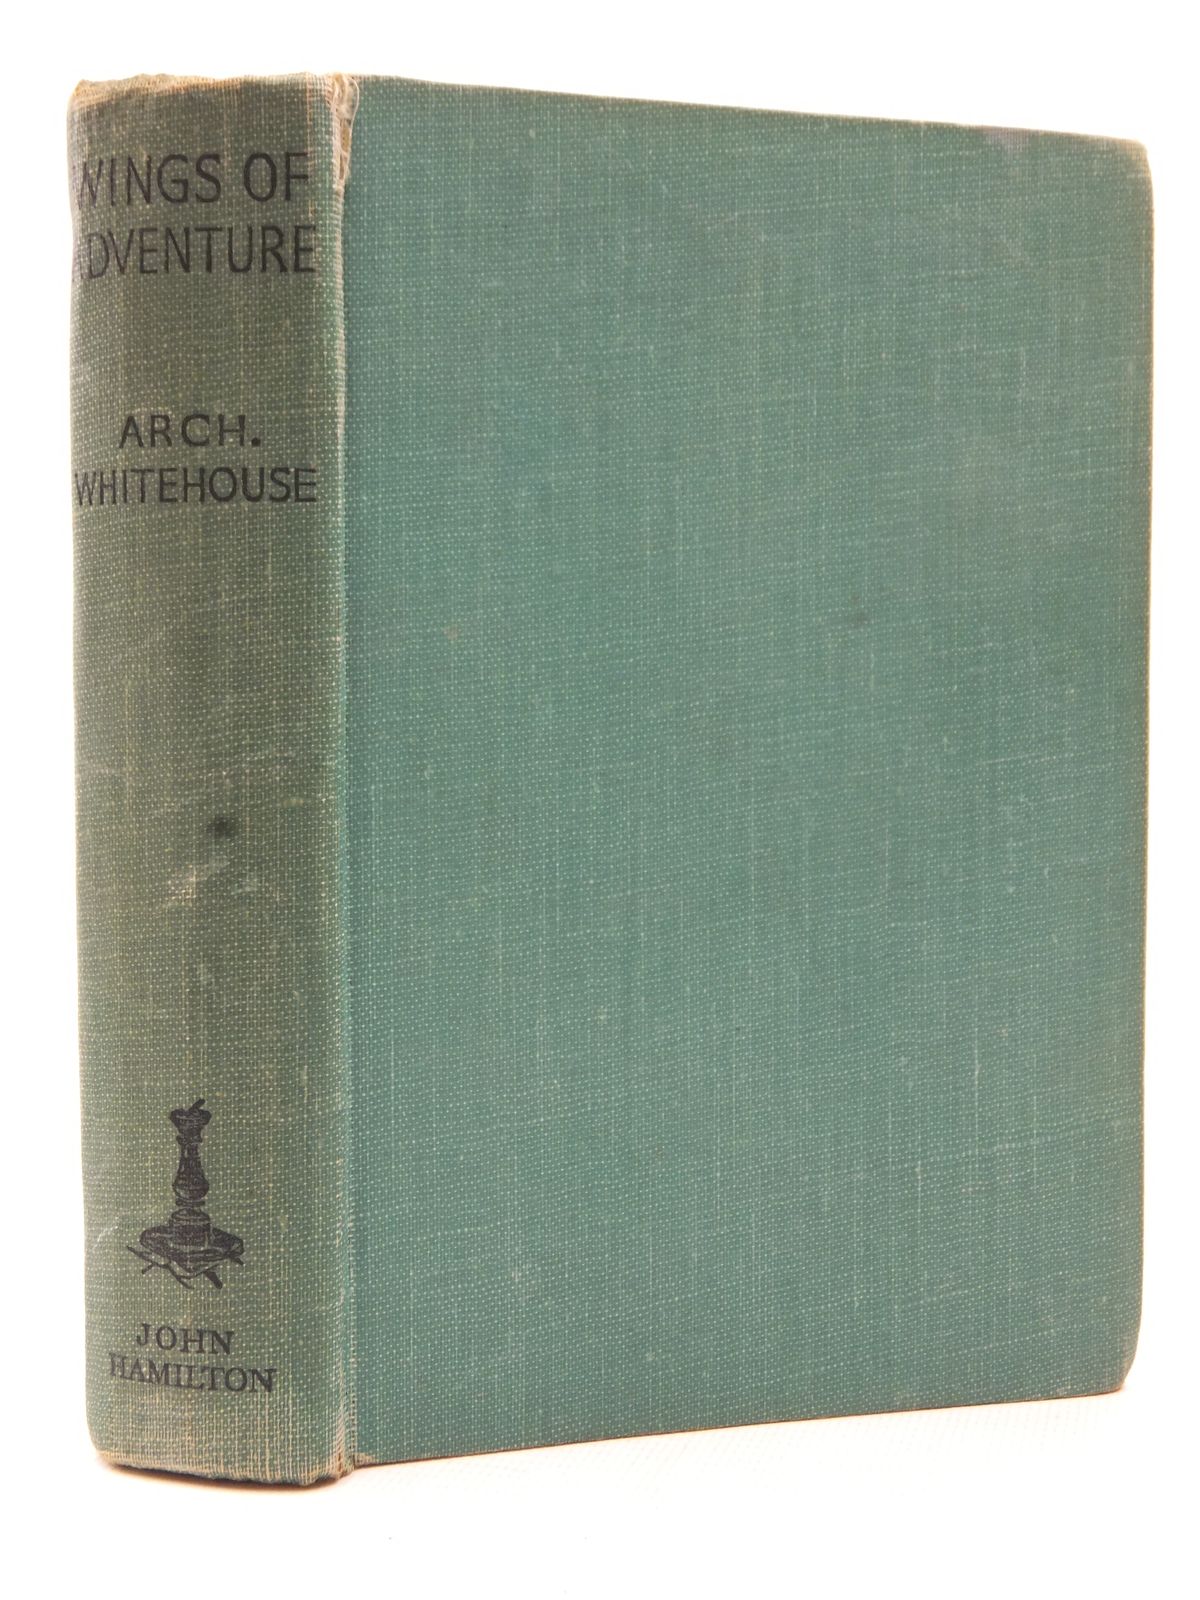 Photo of WINGS OF ADVENTURE written by Whitehouse, Arch published by John Hamilton Ltd. (STOCK CODE: 2123190)  for sale by Stella & Rose's Books